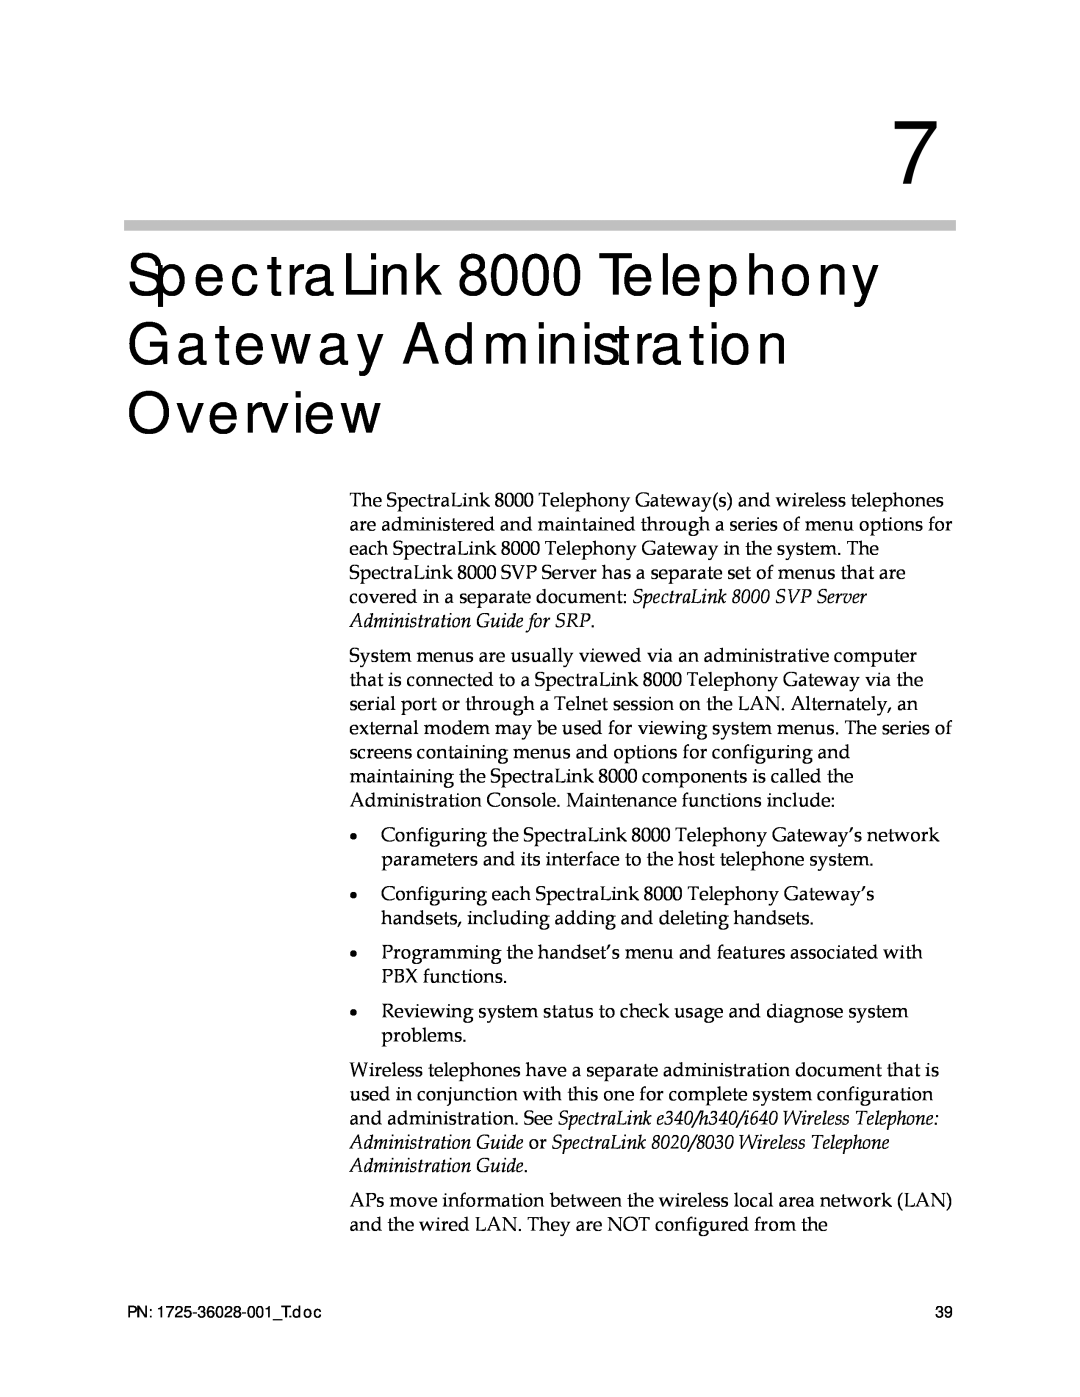 Polycom 1725-36028-001 manual SpectraLink 8000 Telephony Gateway Administration Overview 